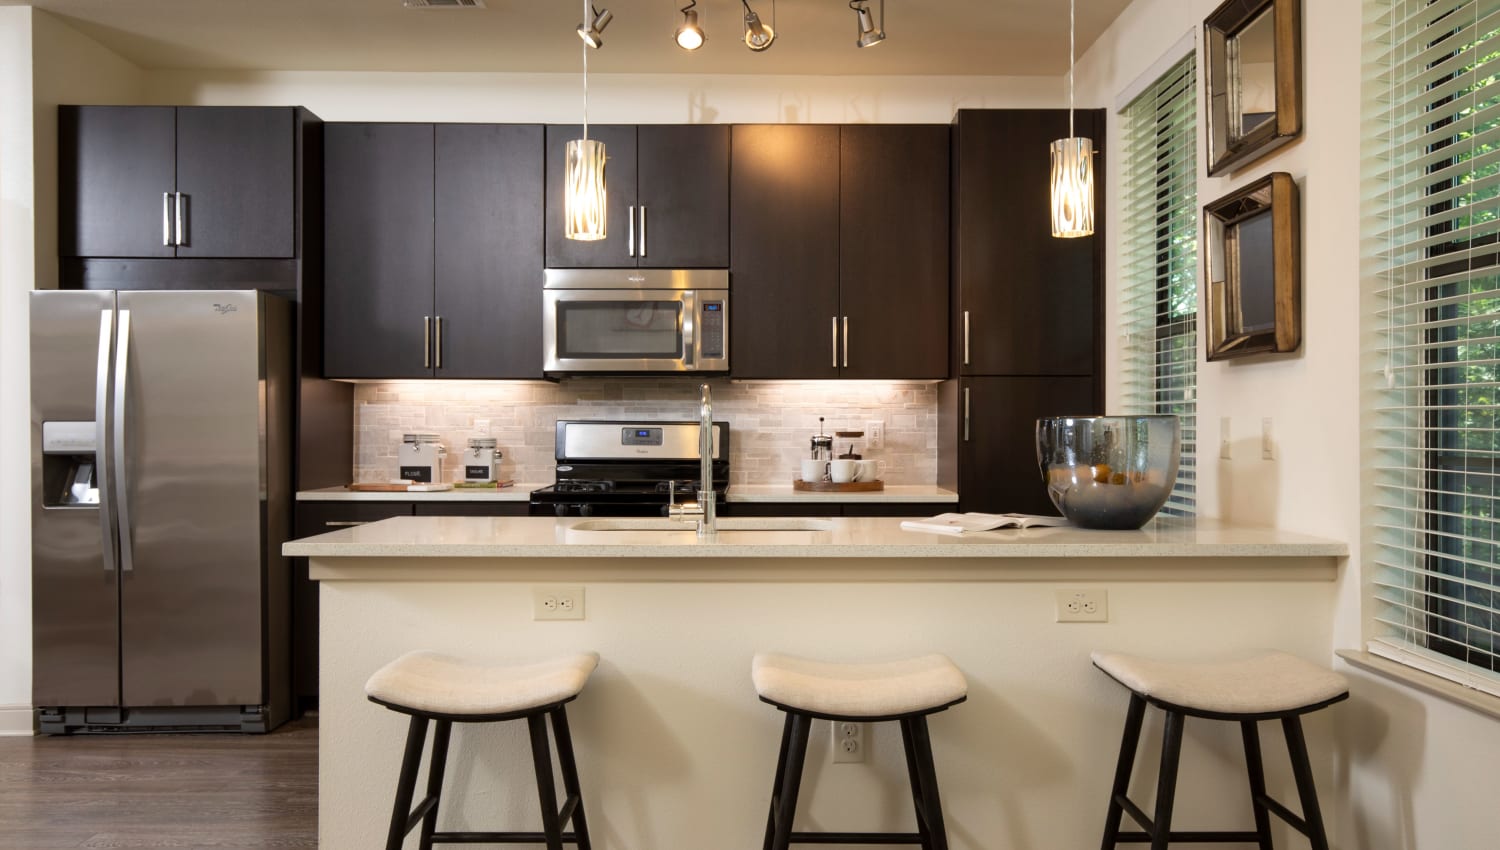 Larges and spacious kitchen with three barstools at Olympus at Memorial in Houston, Texas